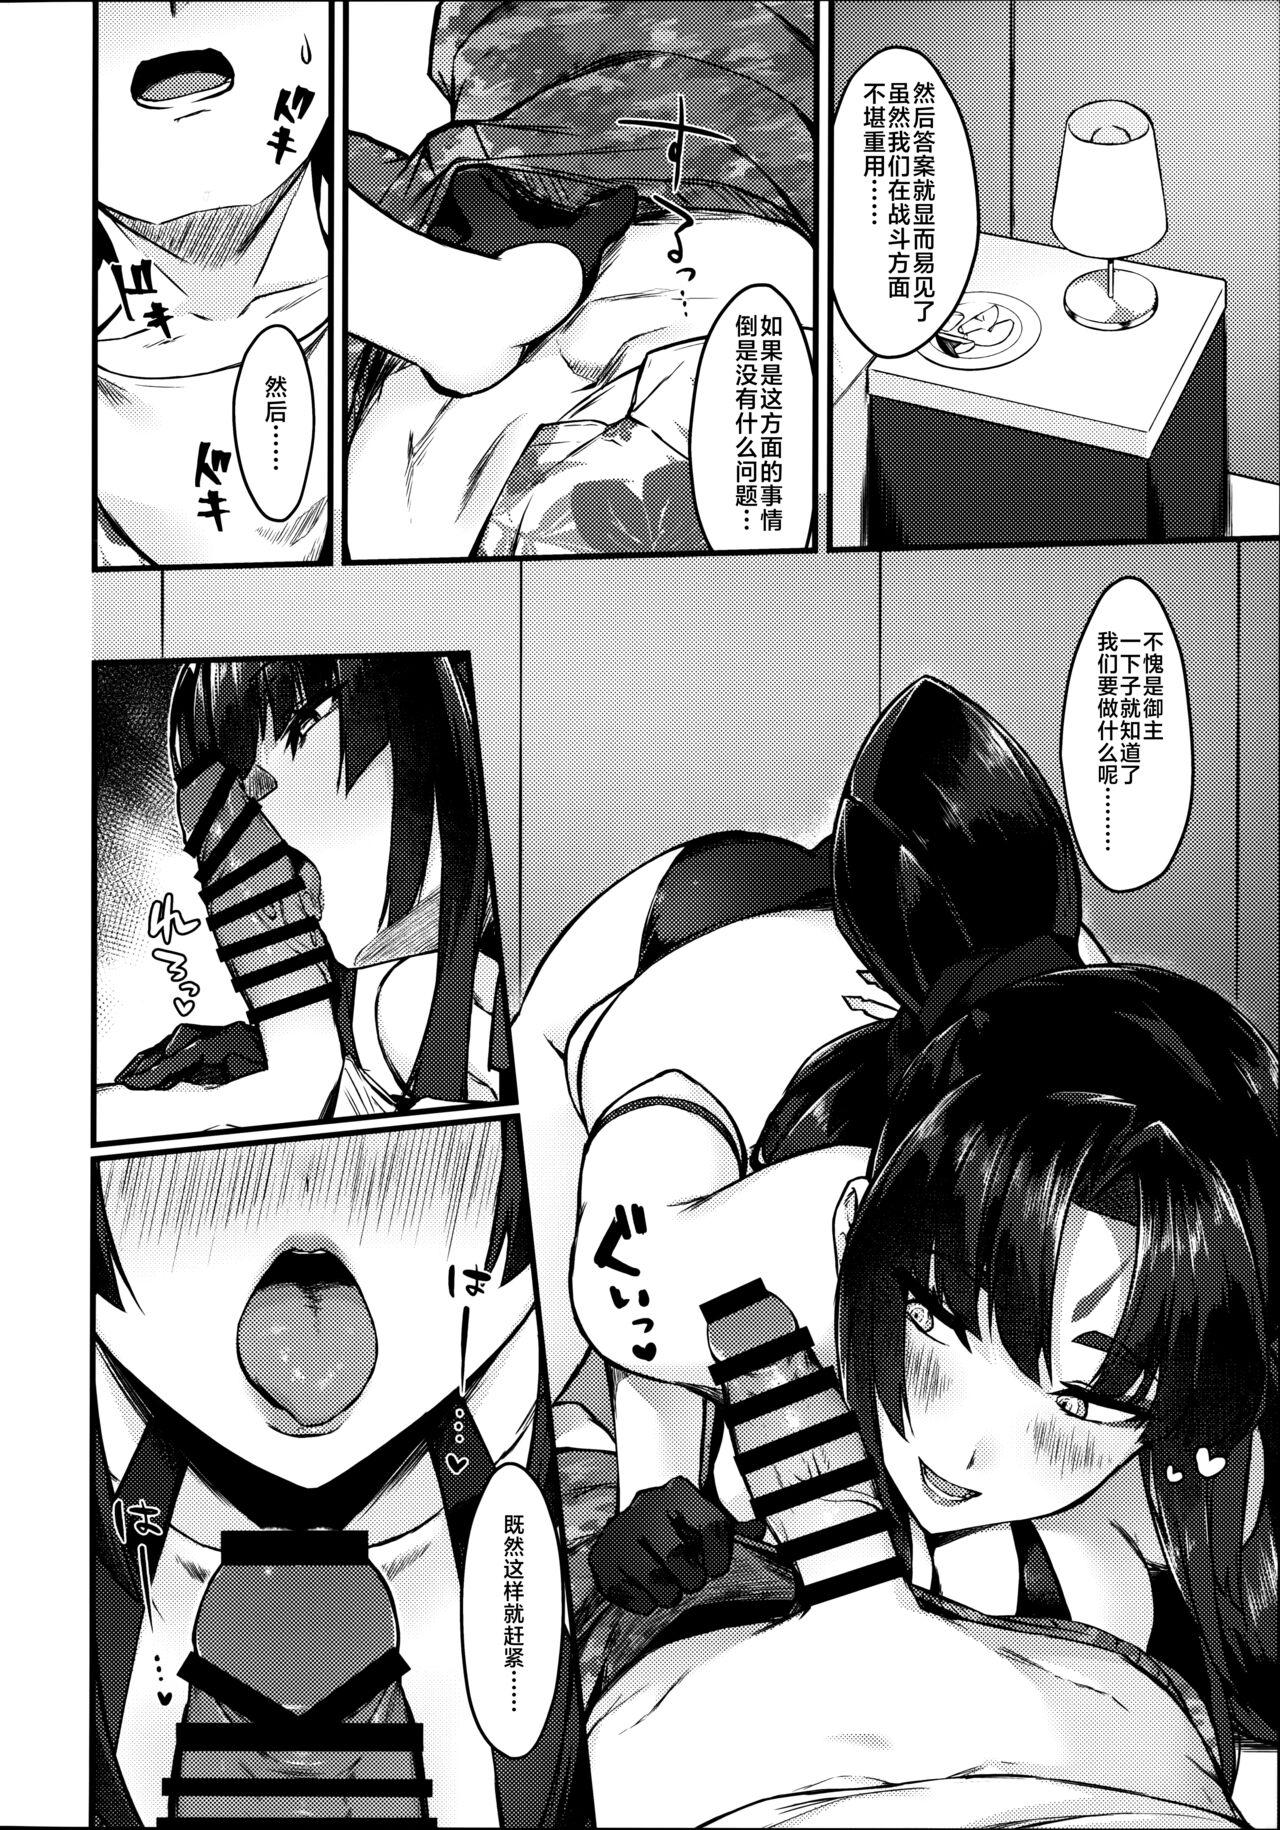 Best Blow Job Ever 牛くらべ - Fate grand order Gay Twinks - Page 8